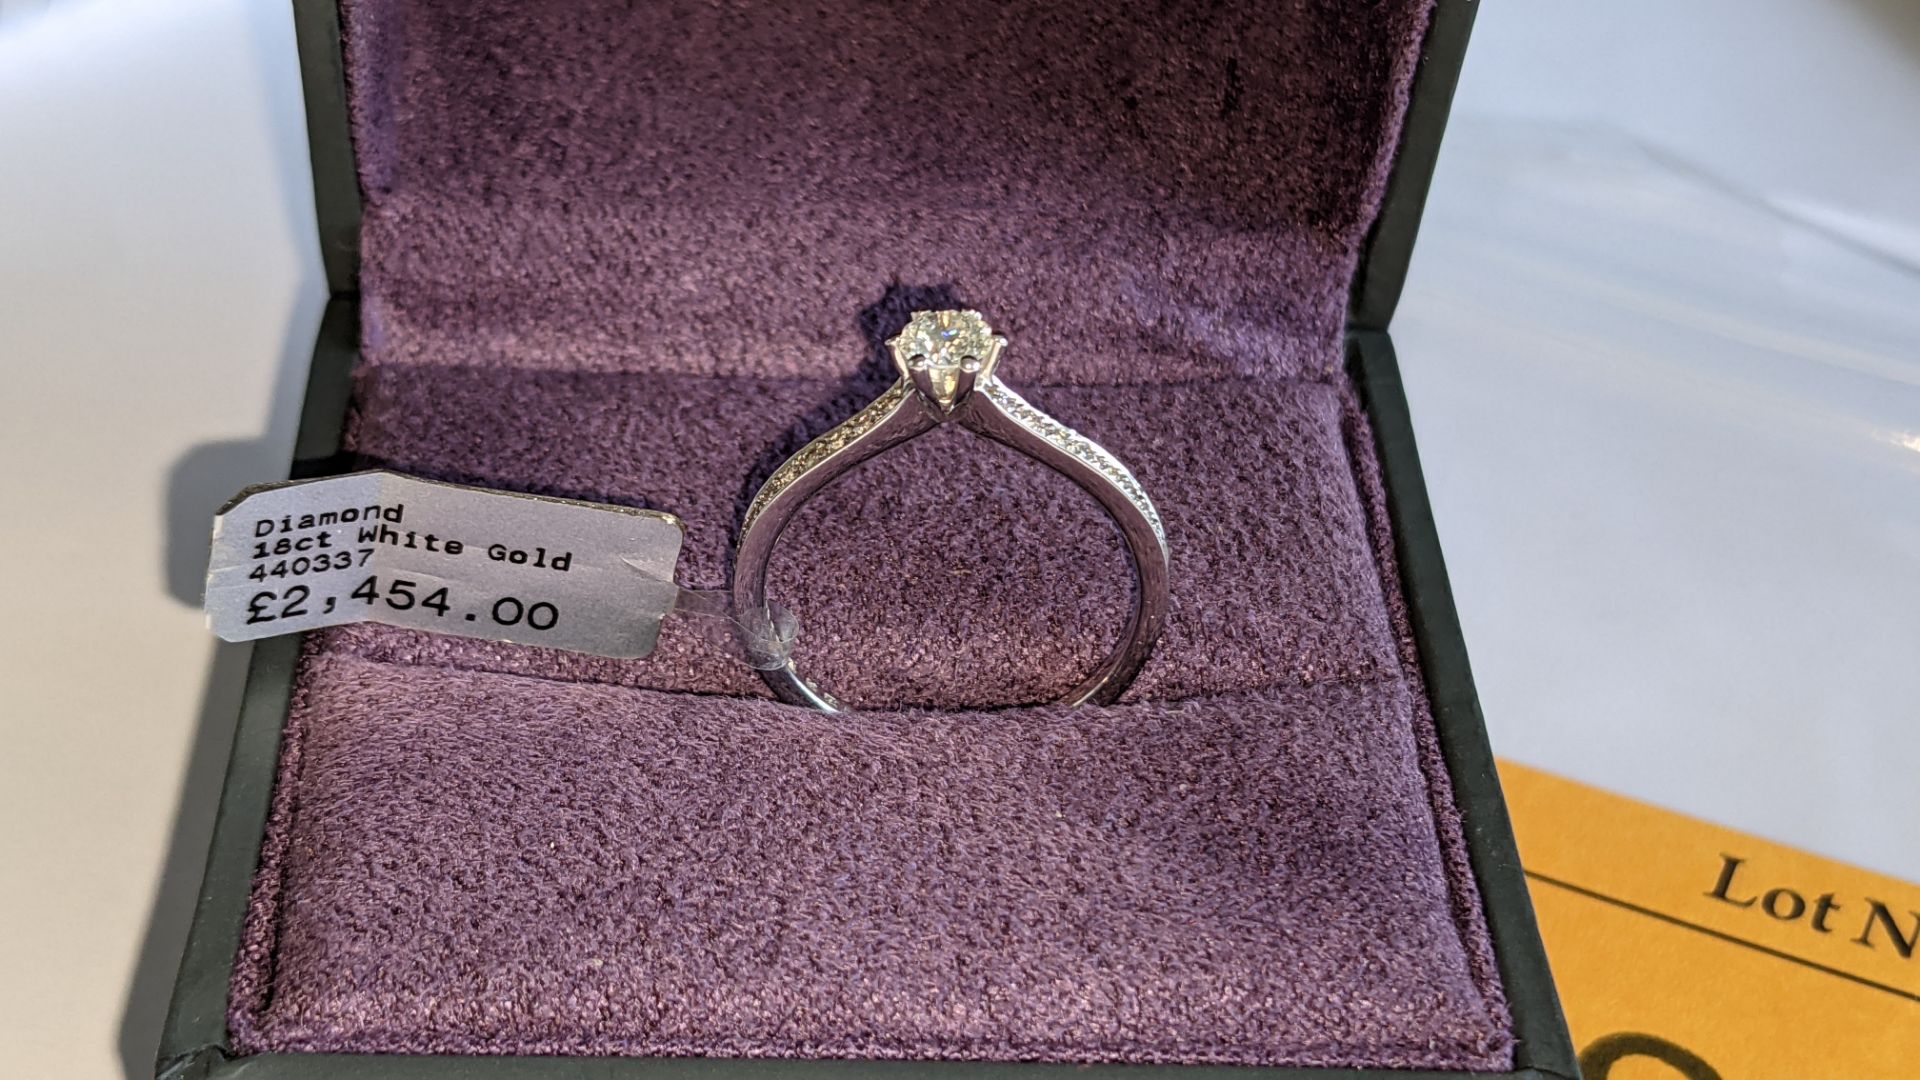 18ct white gold ring with 0.50ct G/Si diamond RRP £2,454 - Image 6 of 14